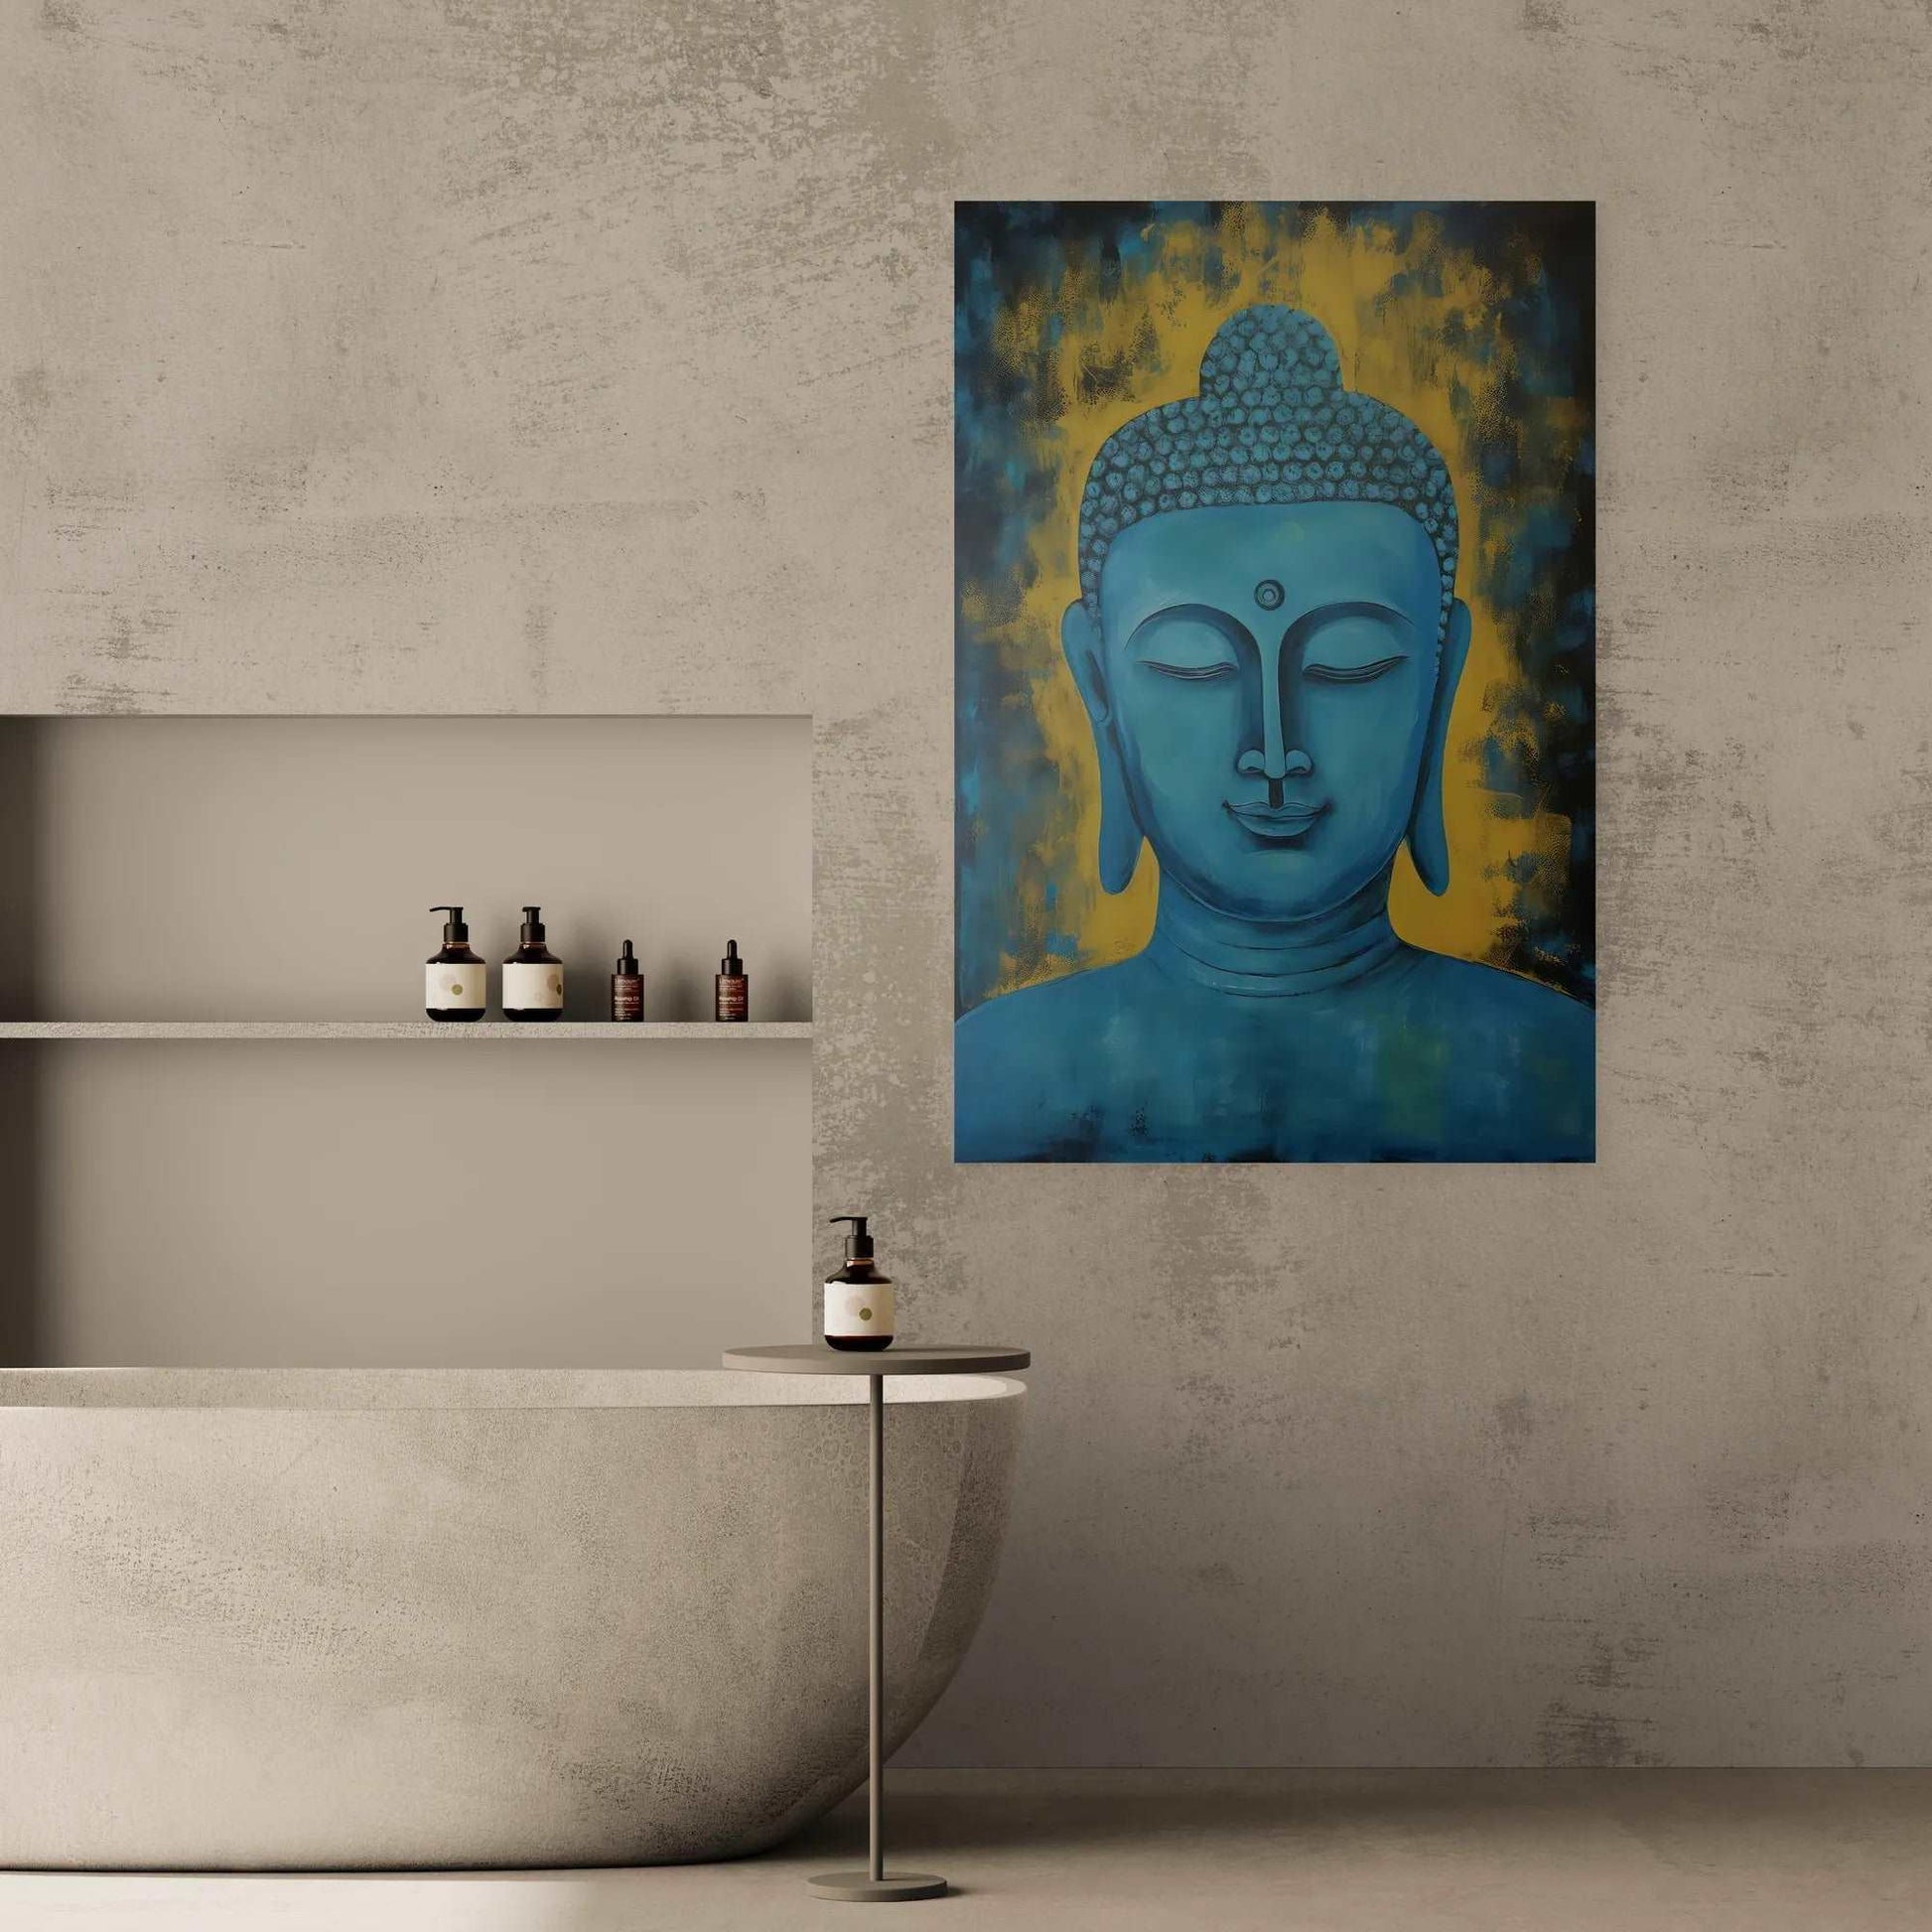 Sleek bathtub area featuring a teal and gold Buddha painting, creating a spa-like atmosphere with minimalist decor.